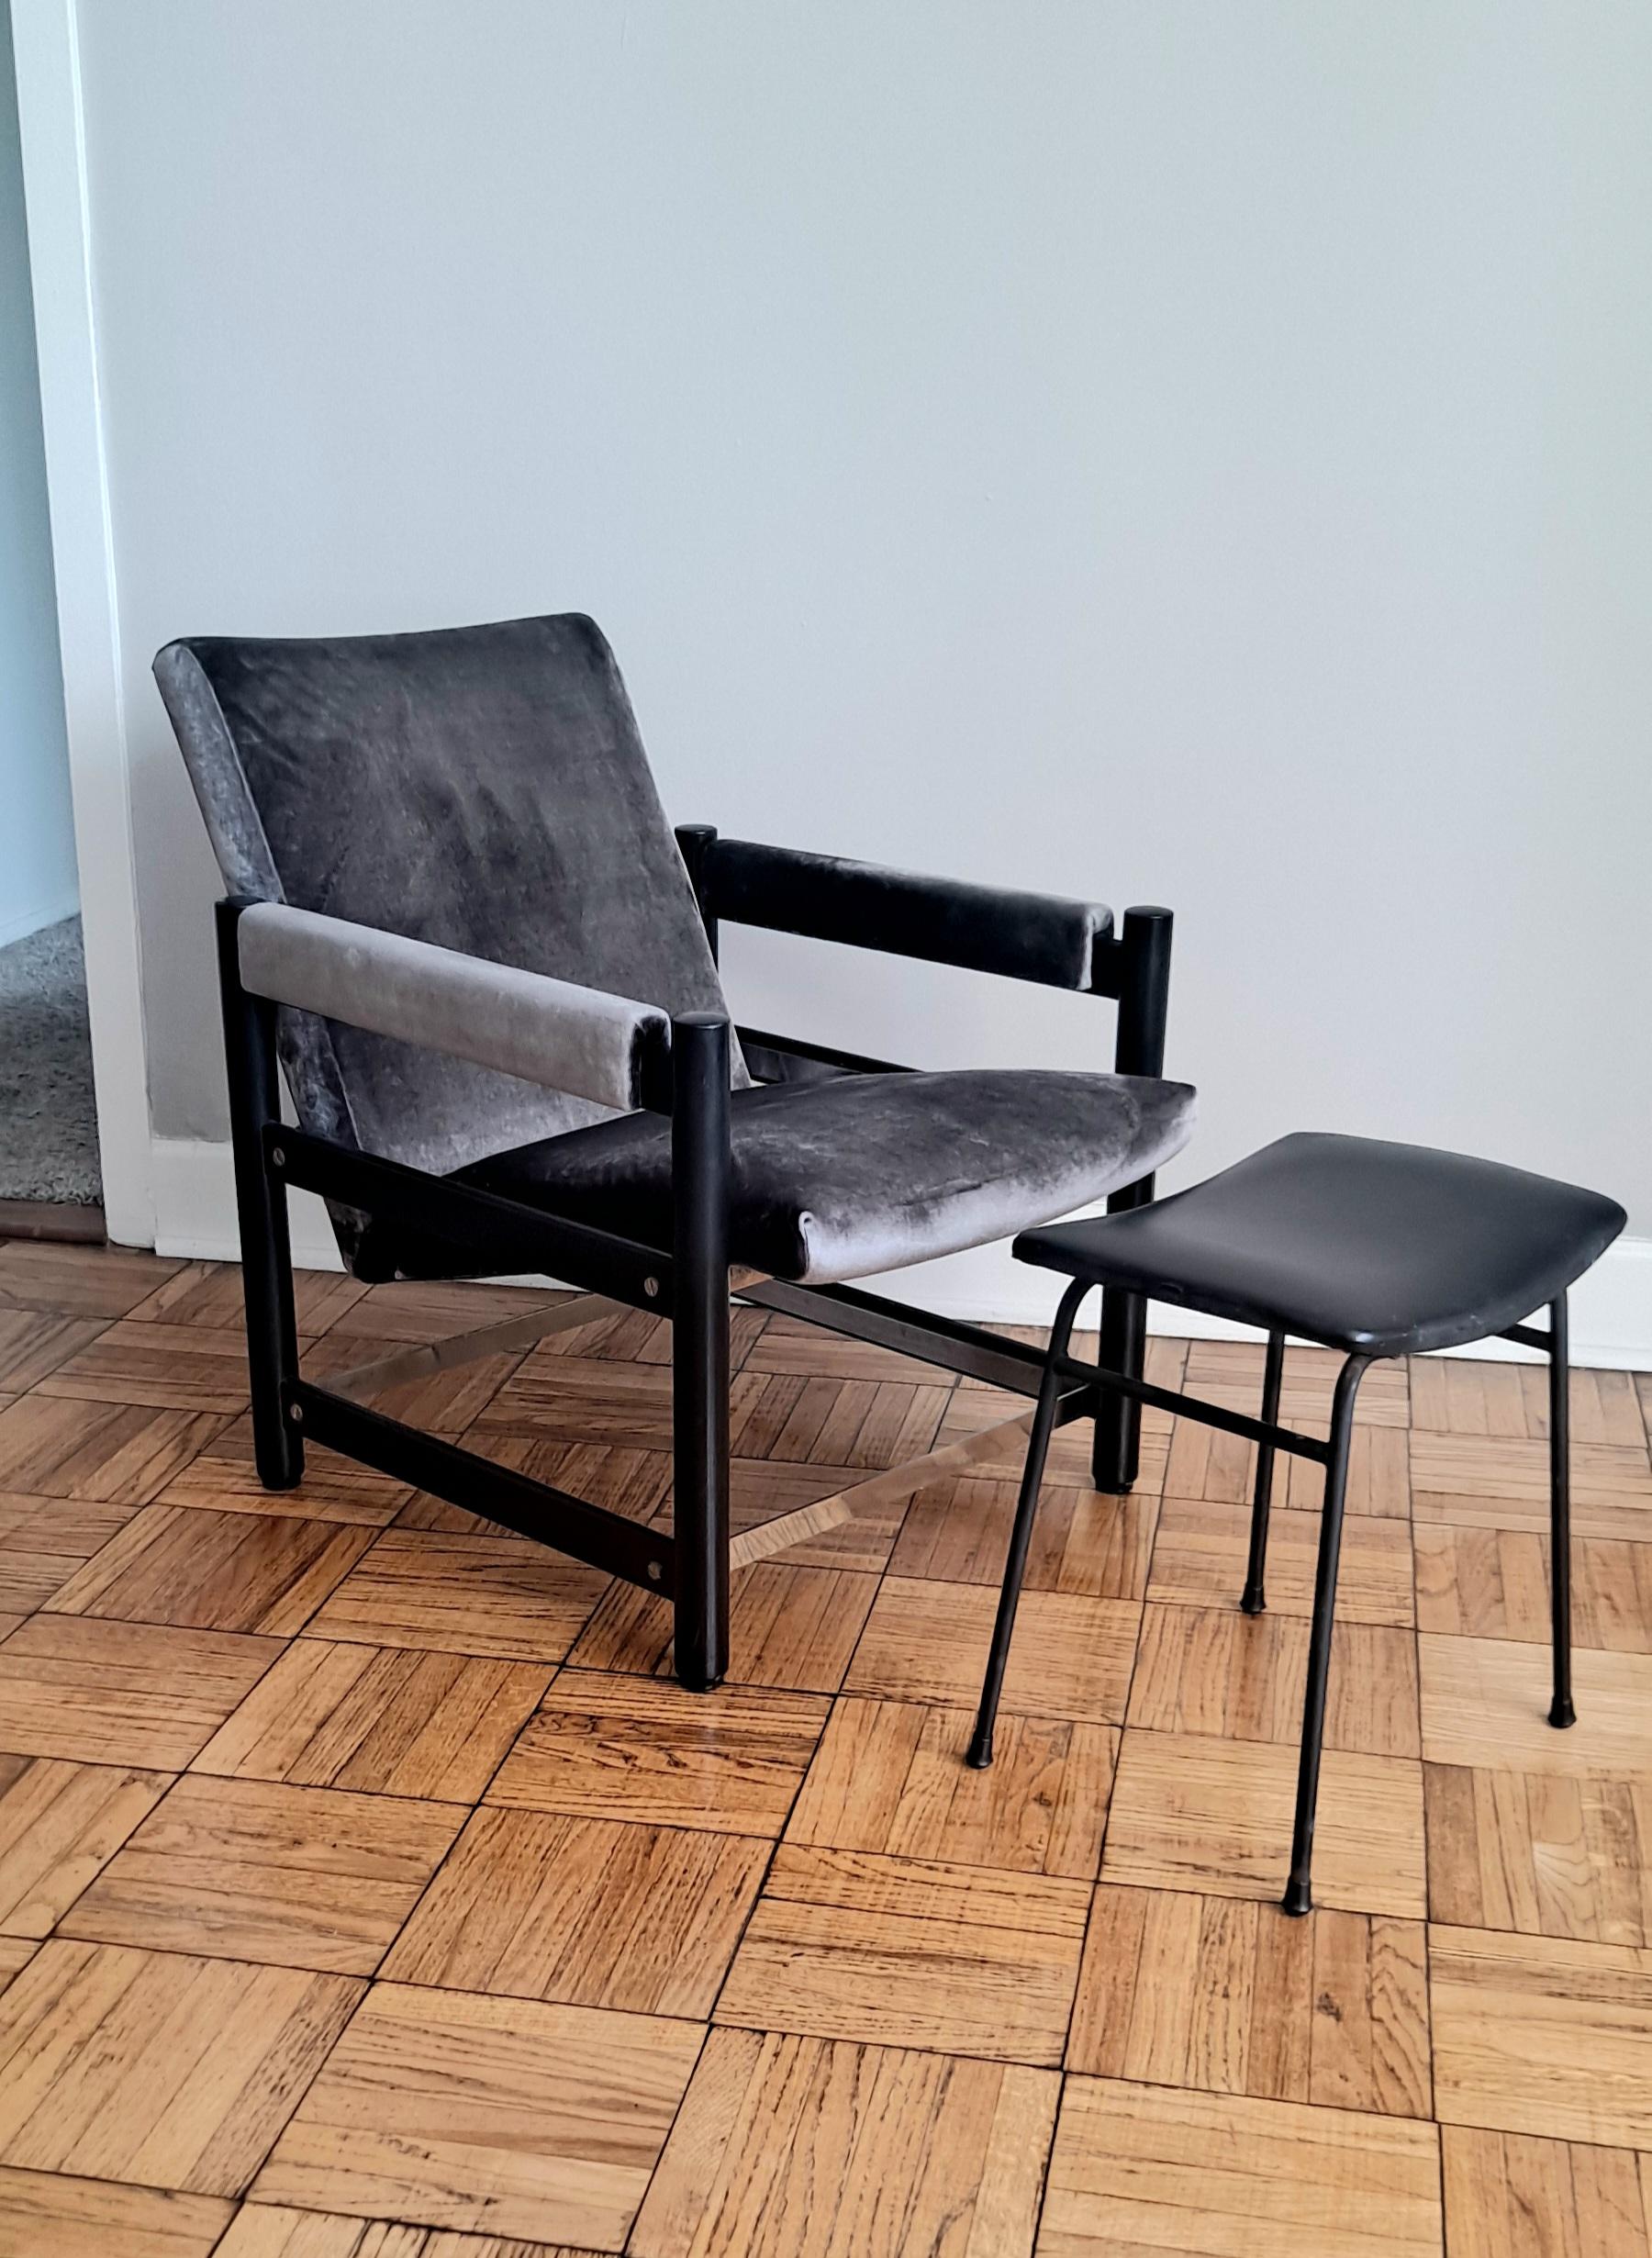 Mid-20th Century Italian Chairs with the Ottoman For Sale